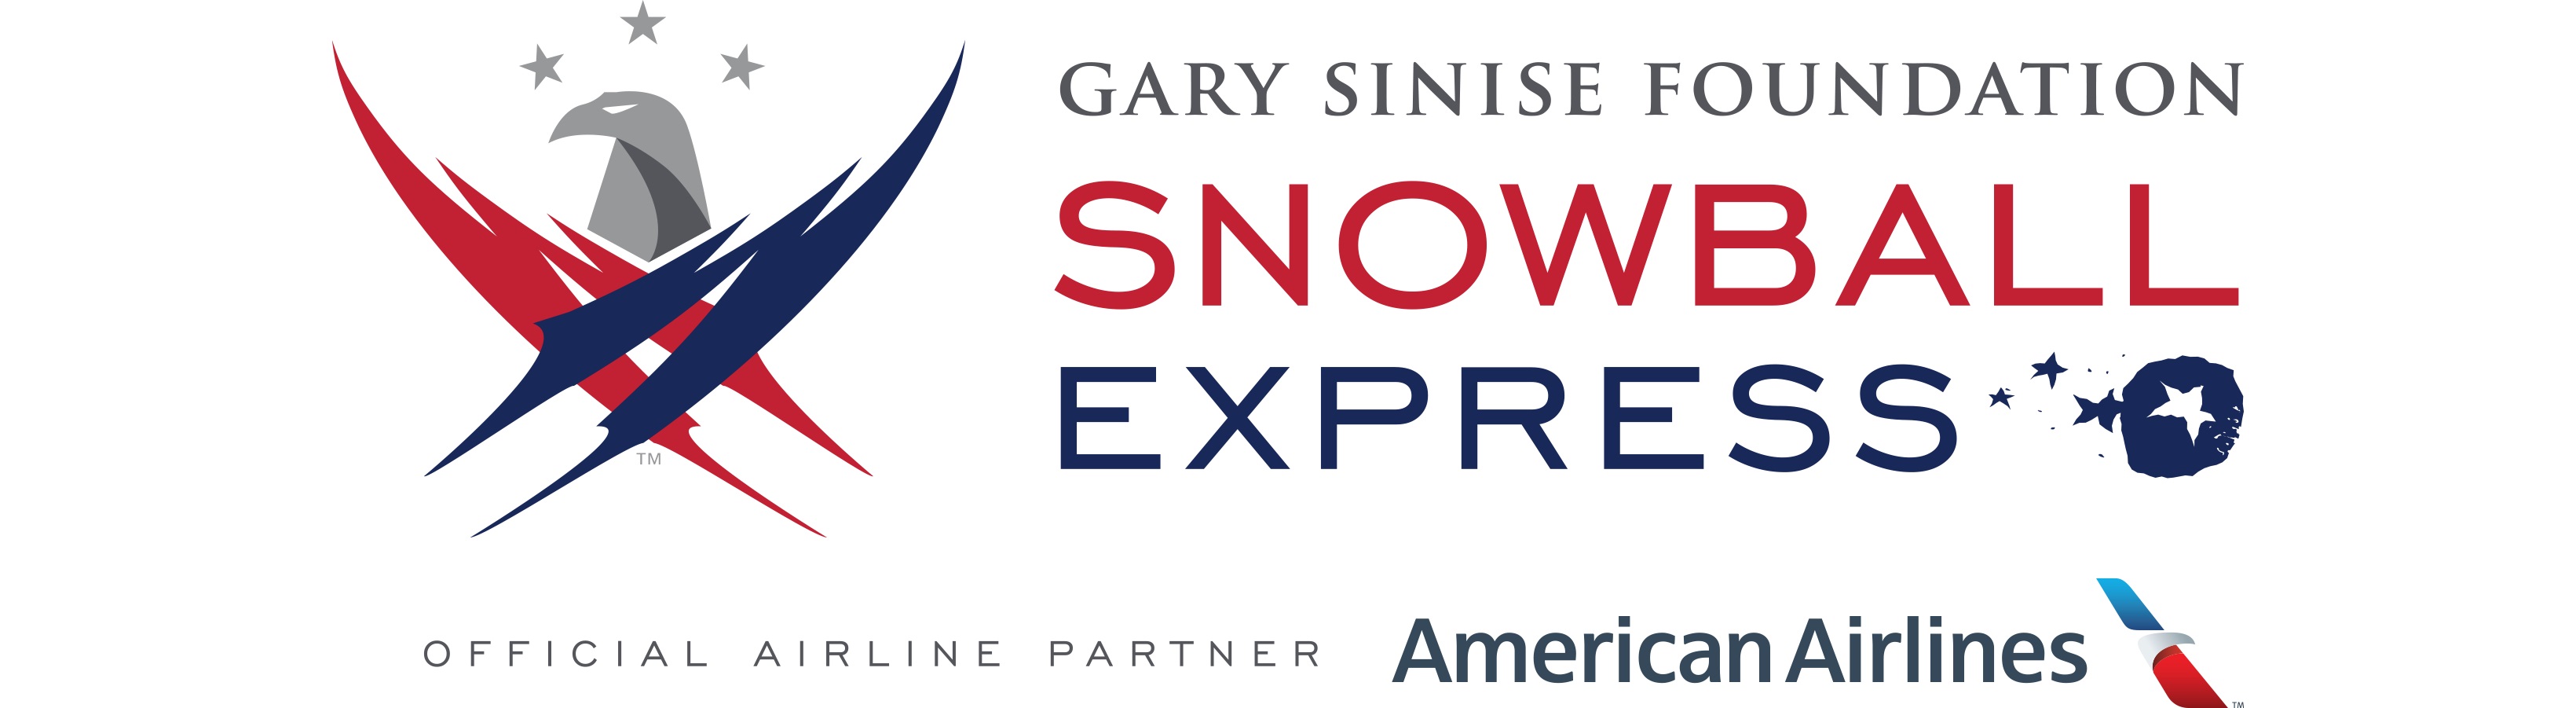 Home Page Snowball Express